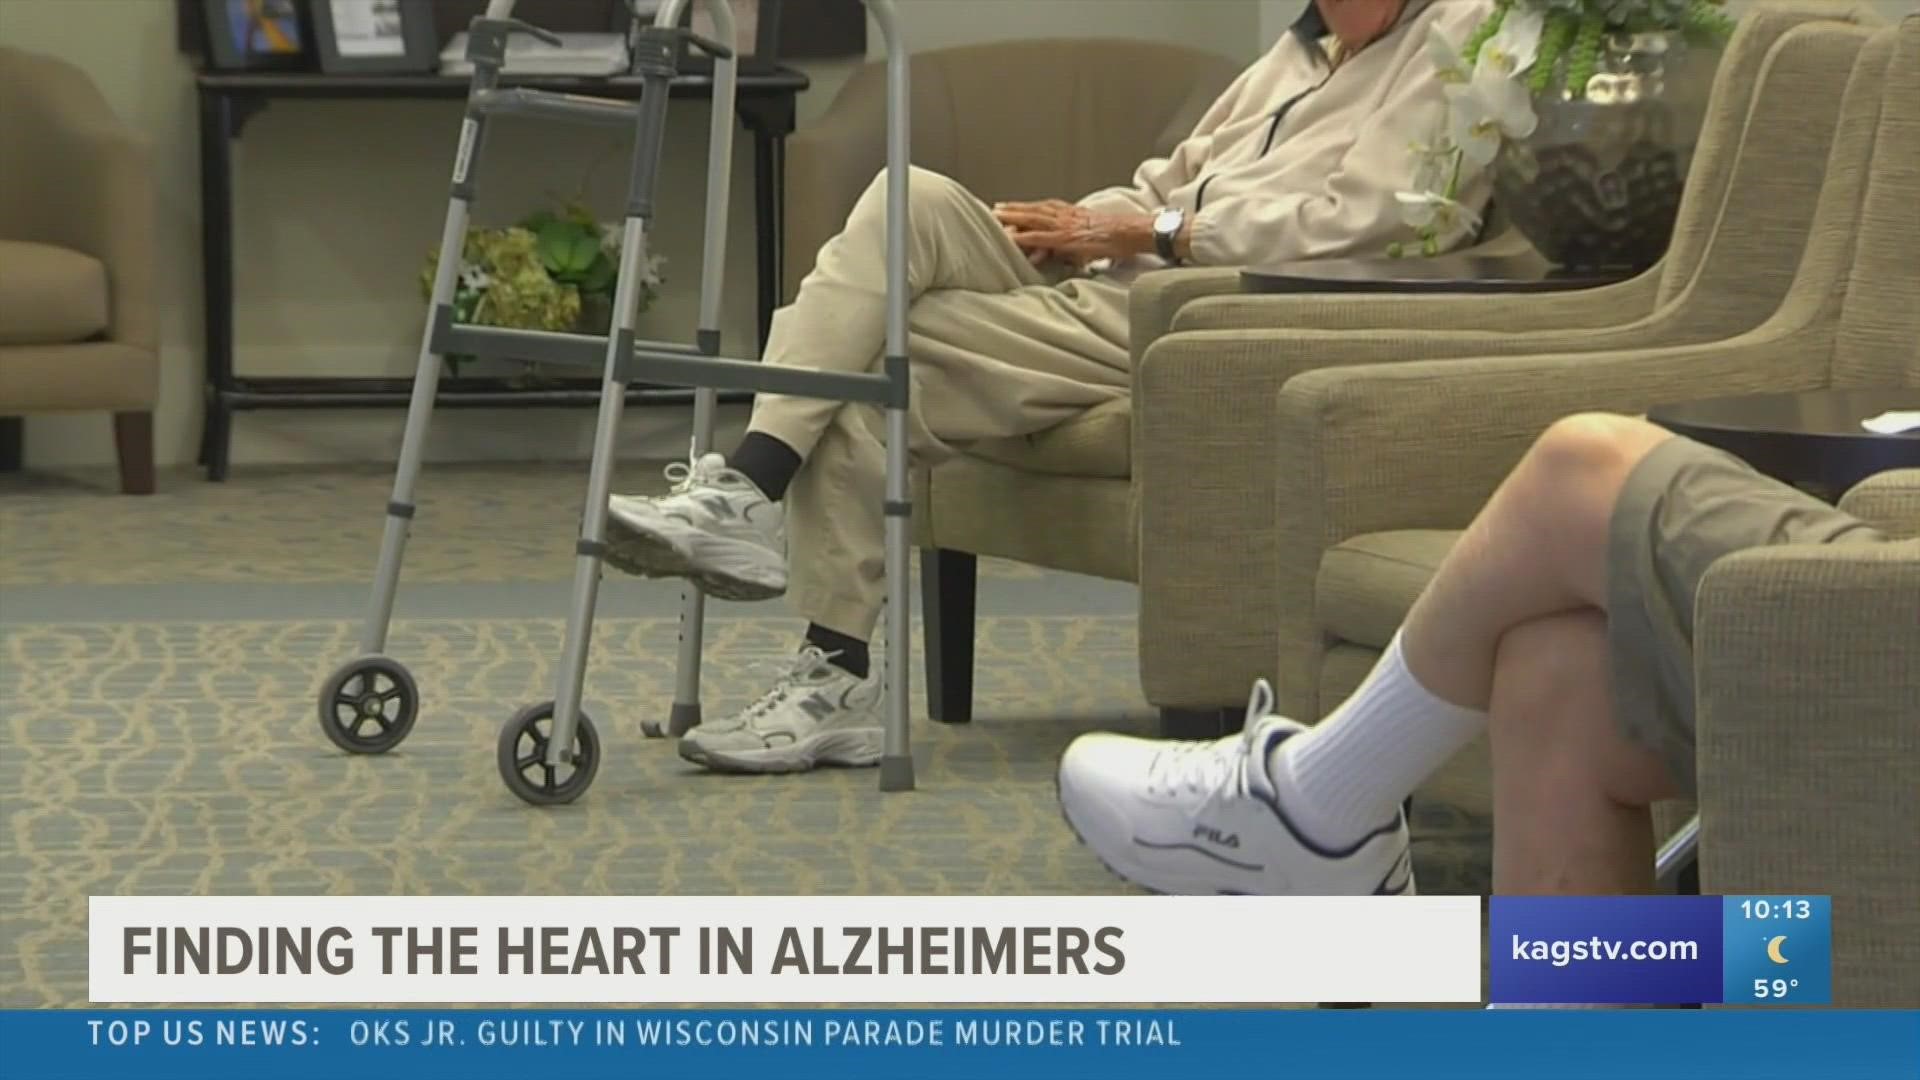 An Alzheimer care facility shared how people could normalize the disease by allowing their loved ones to embrace it.